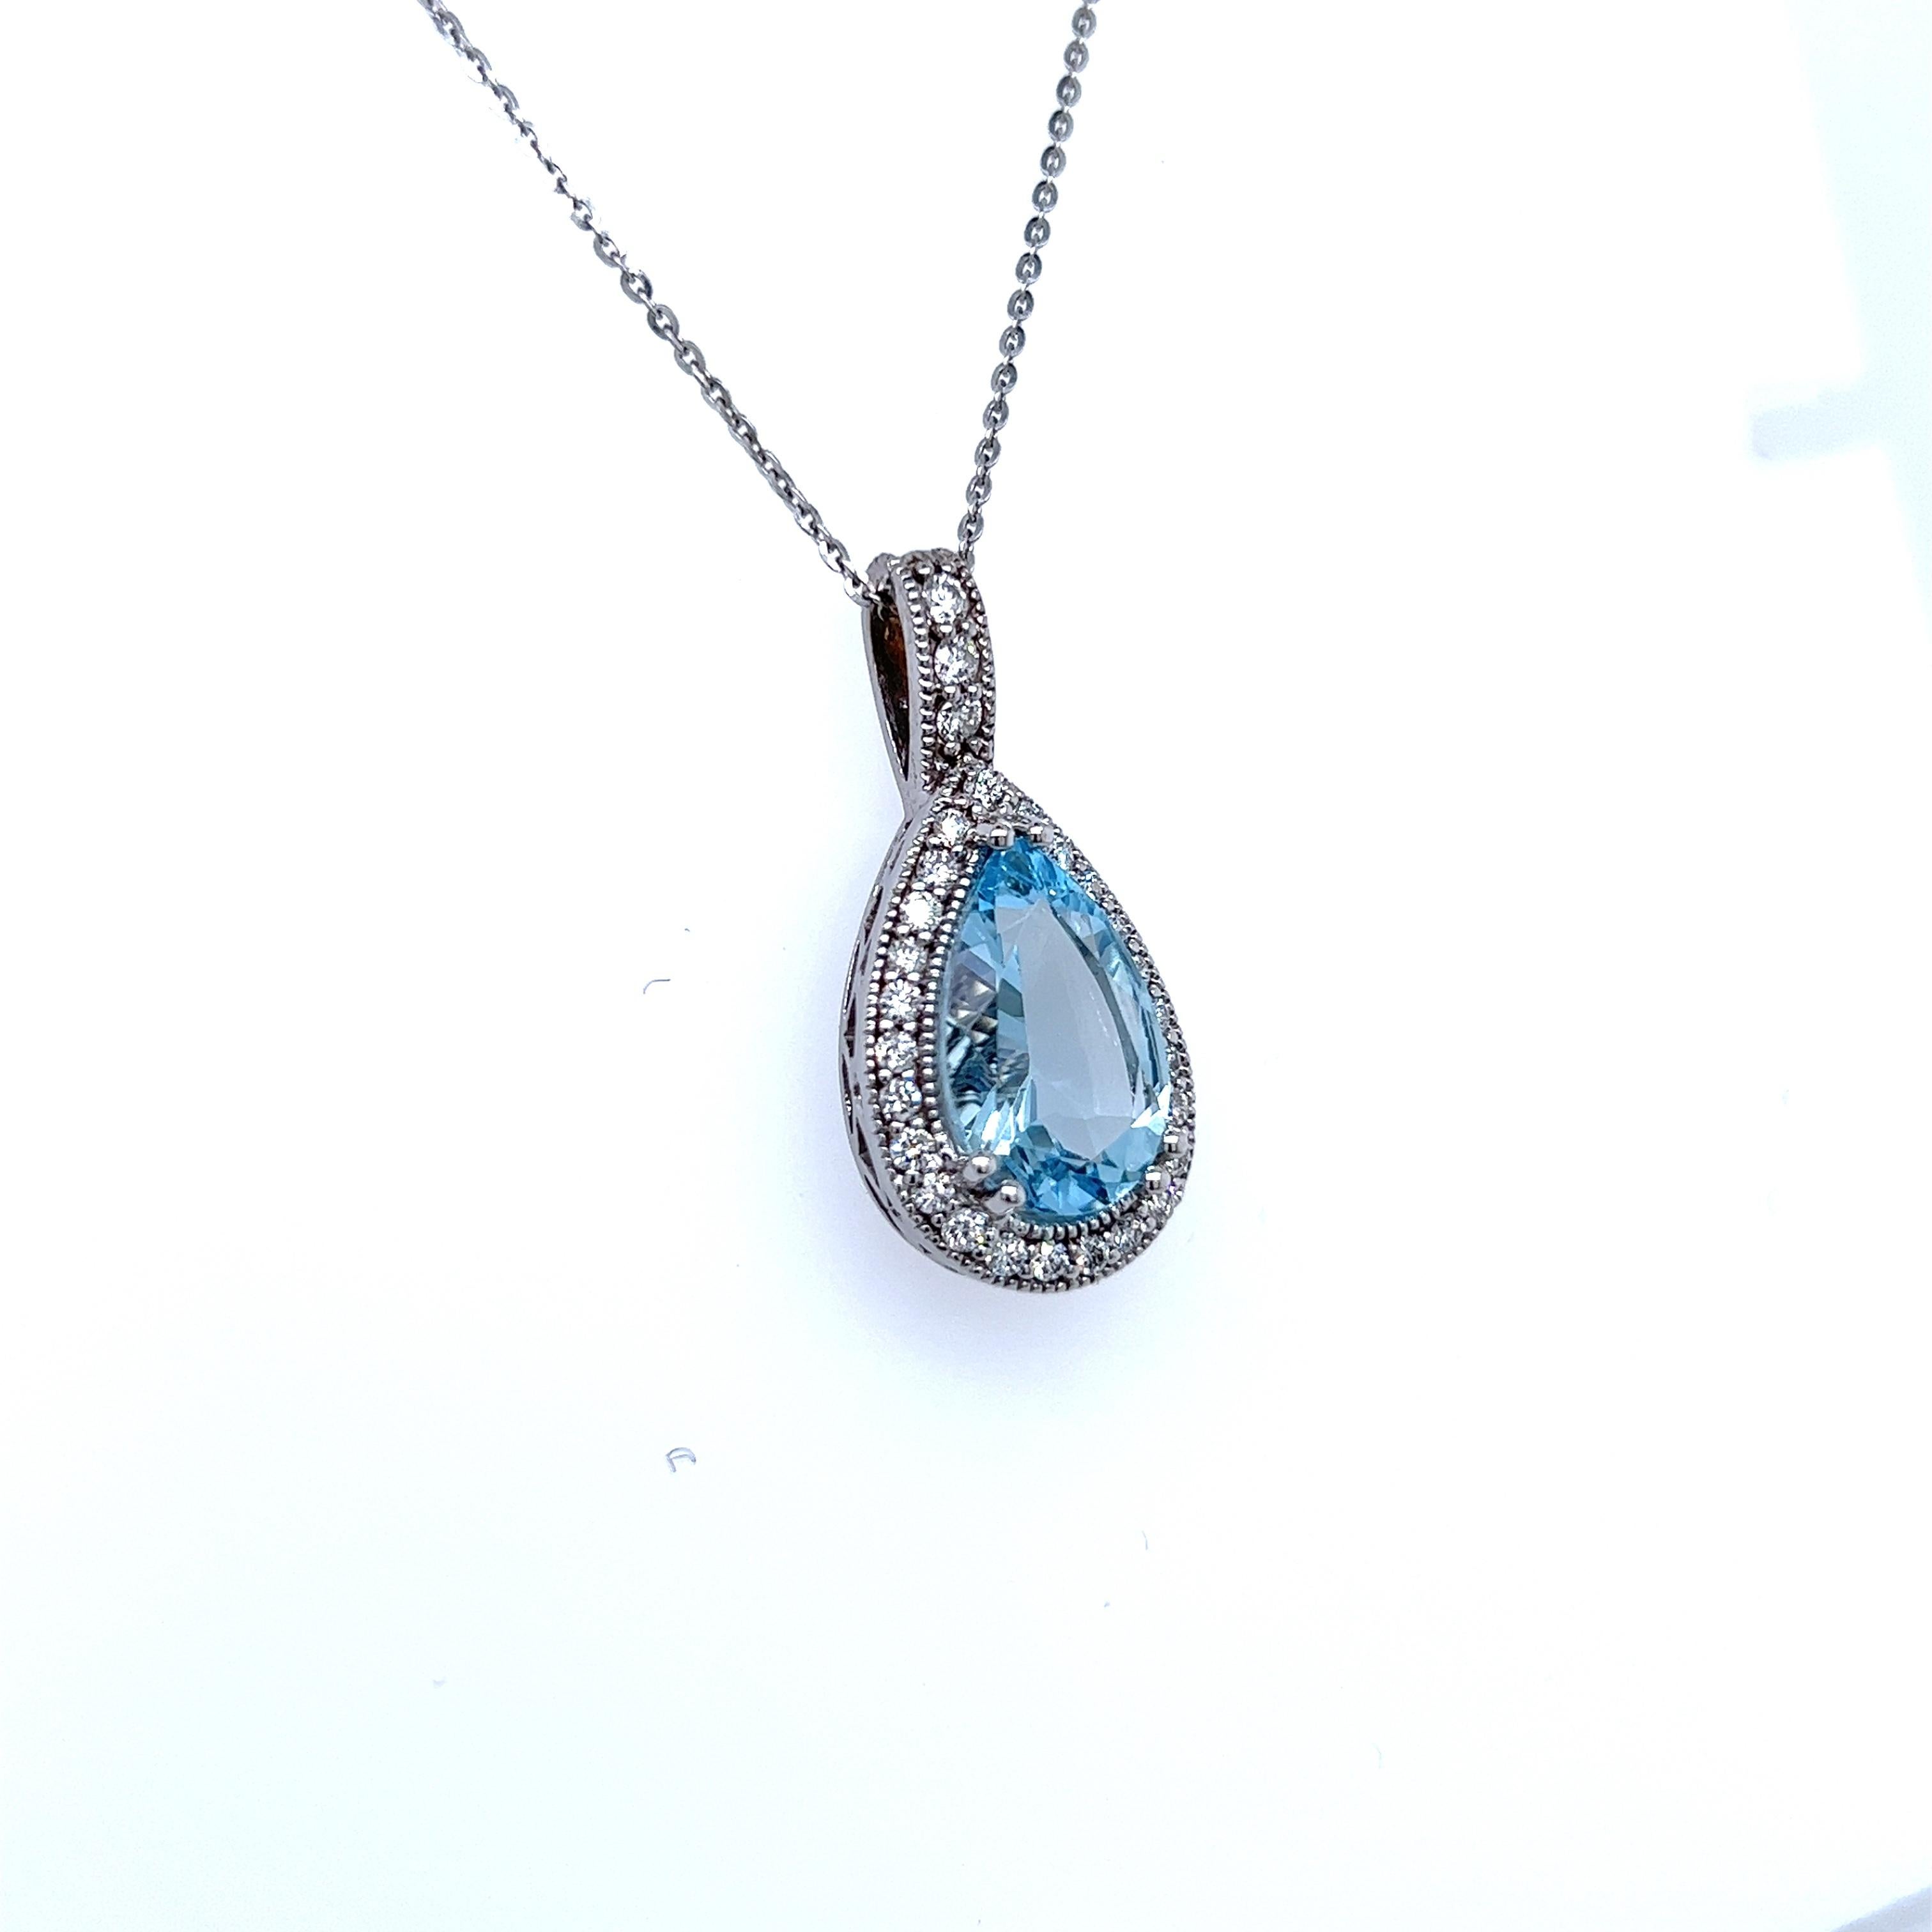 Mixed Cut Natural Aquamarine Diamond Pendant with Chain 14k W Gold 4.19 TCW Certified  For Sale